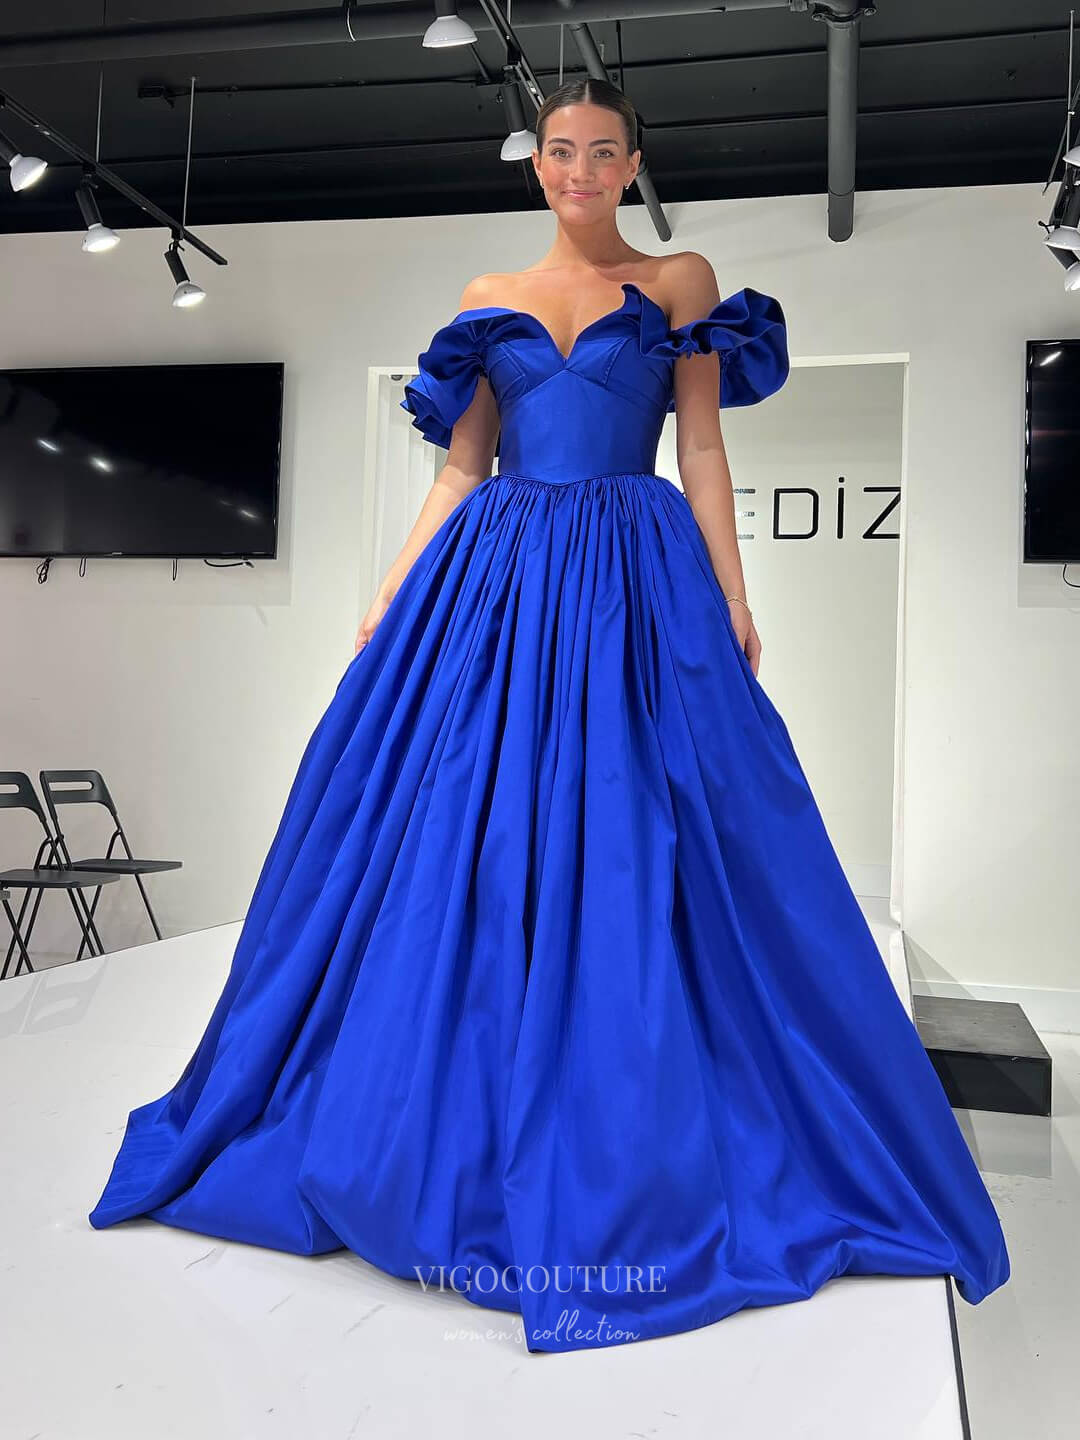 Blue Satin Prom Dresses Ruffle Off the Shoulder Formal Gown 24179-Prom Dresses-vigocouture-Blue-Custom Size-vigocouture